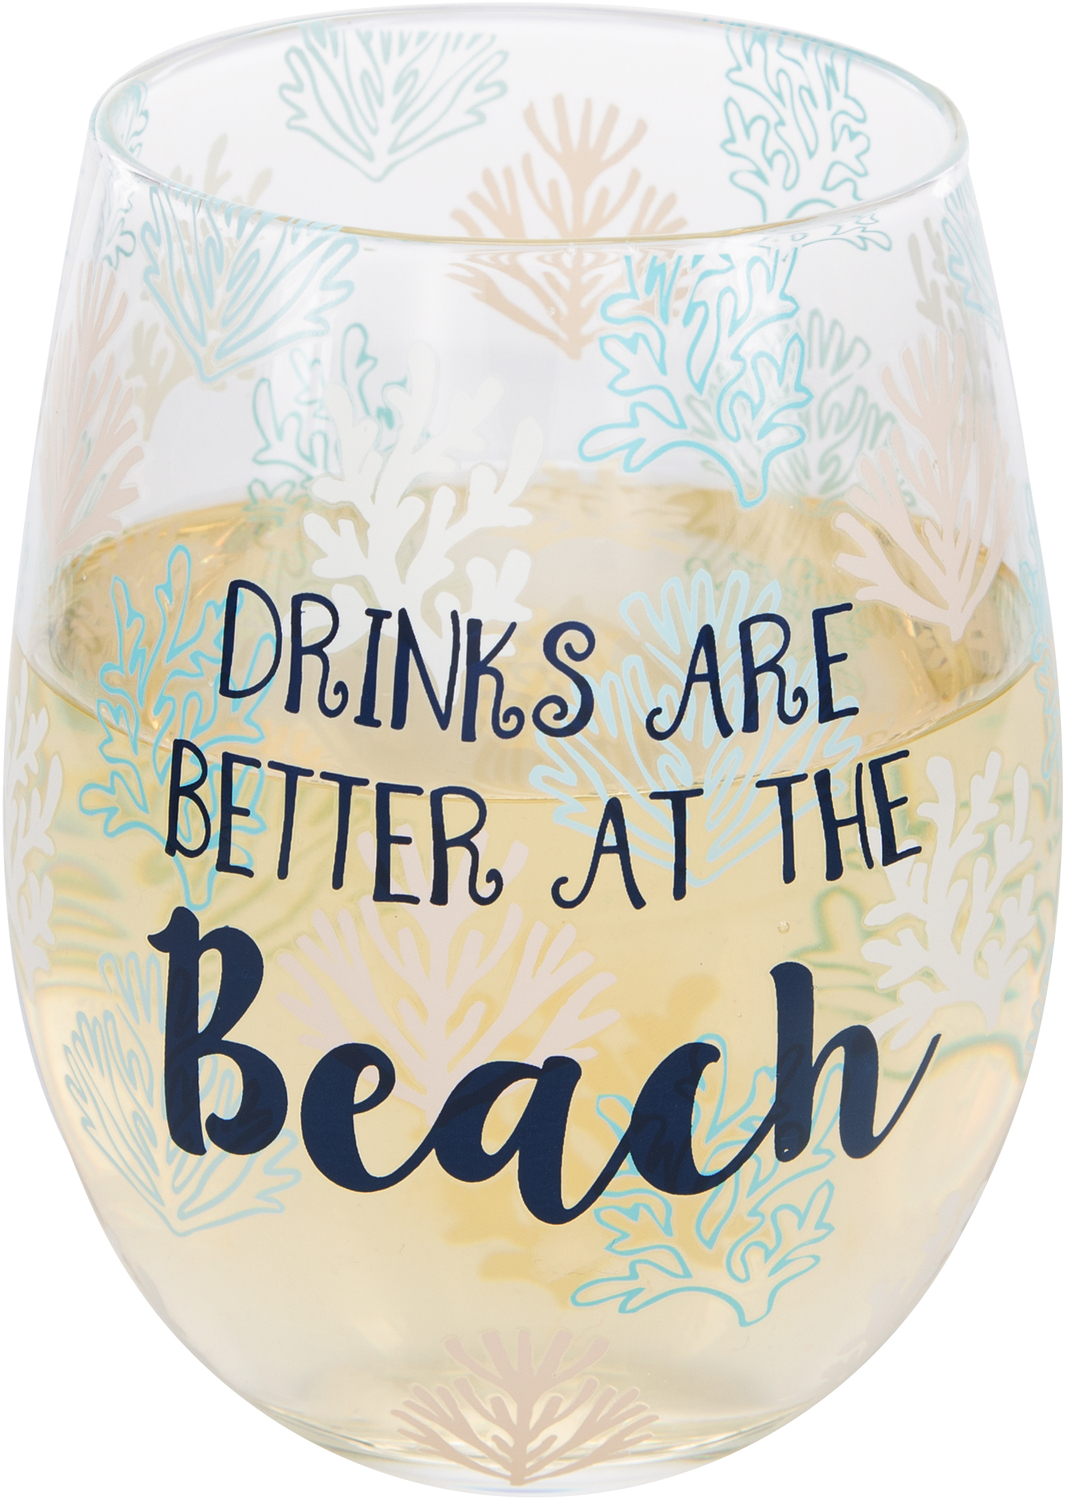 At the Beach by We People - At the Beach - 18 oz Stemless Wine Glass